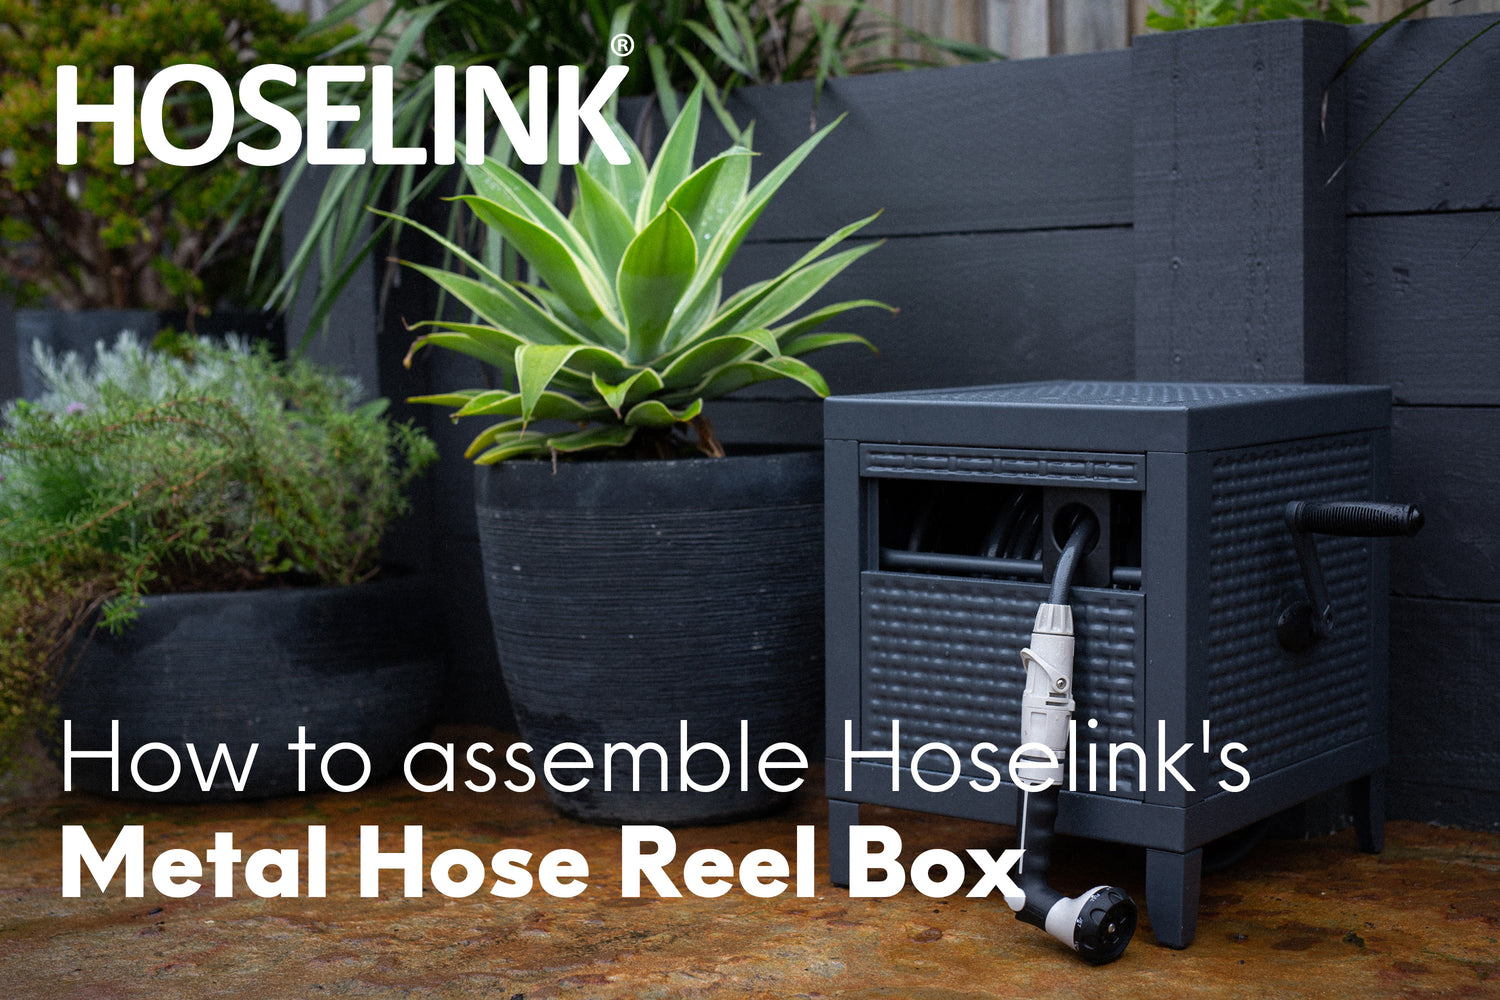 How to Assemble Hoselink's Metal Hose Reel Box